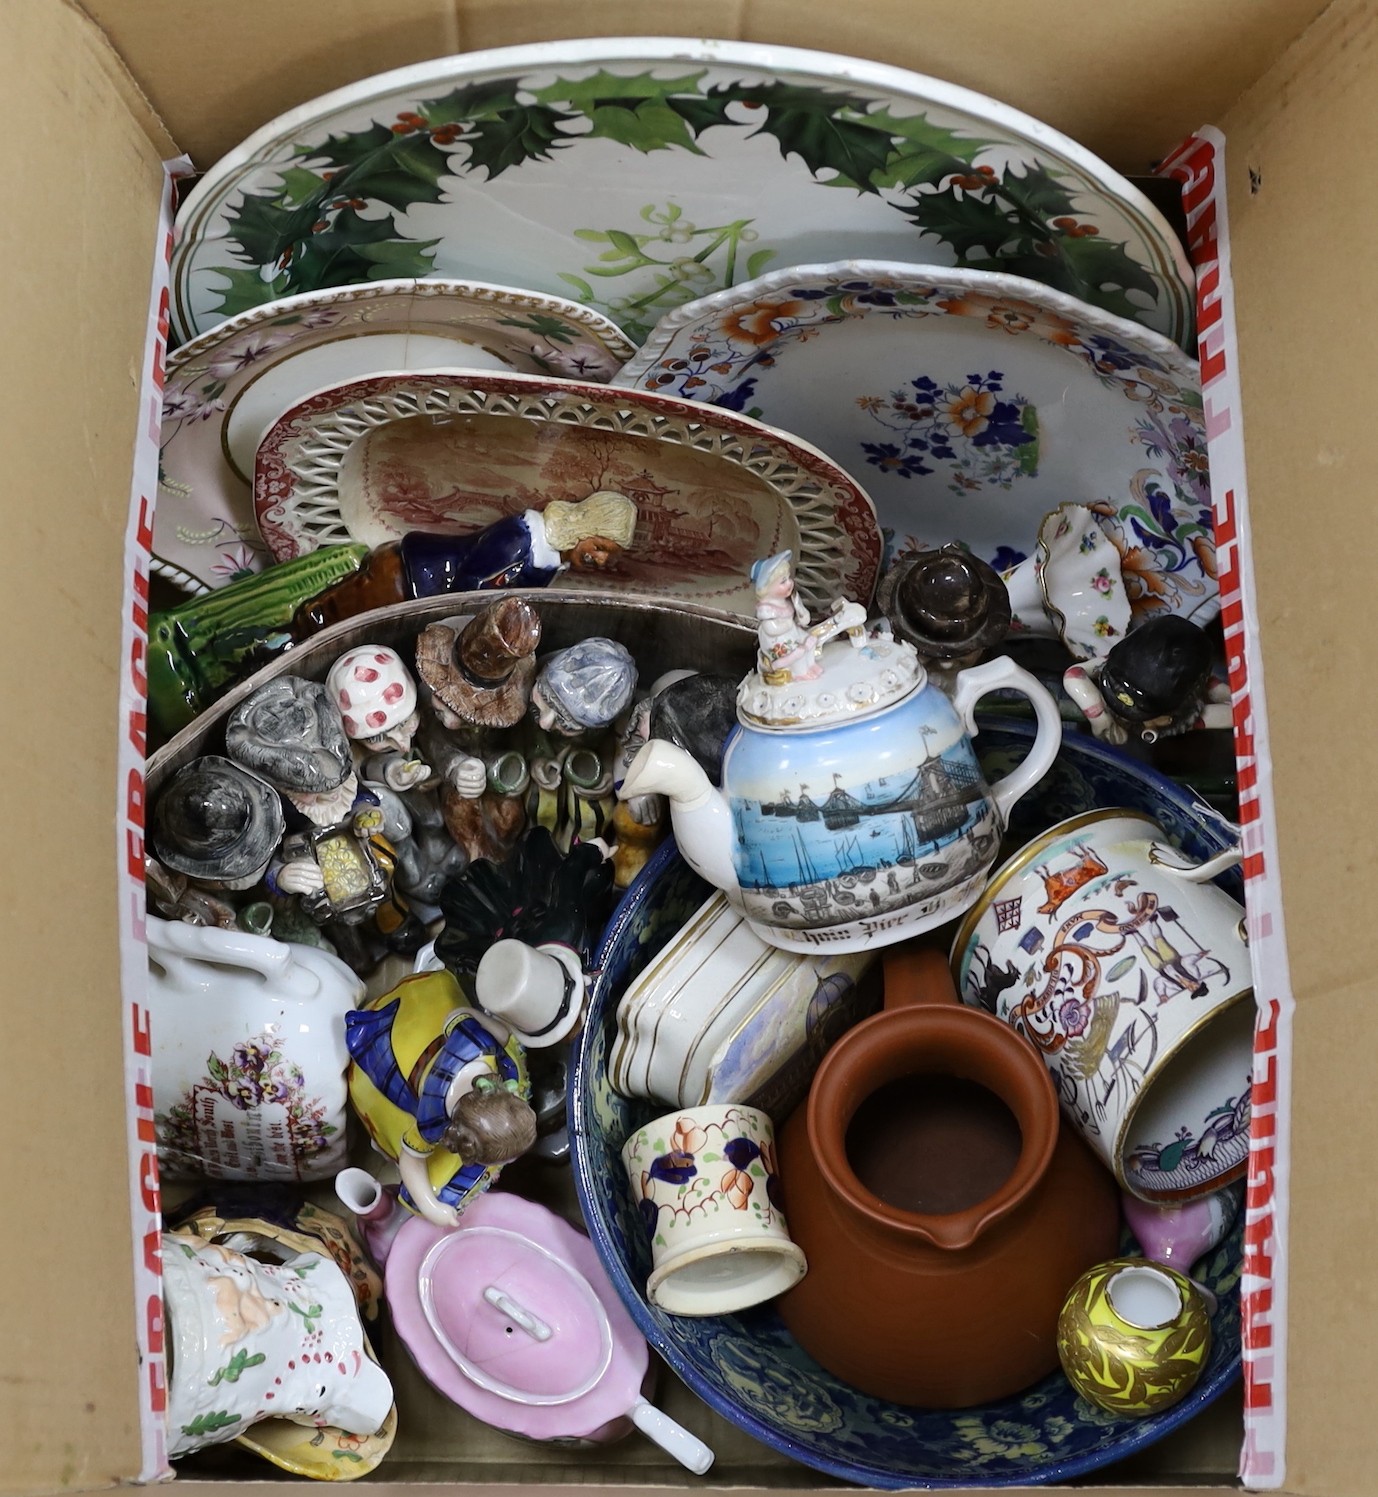 A quantity of various English and other European ceramics including Mintons, Copeland, Crown Derby, Davenport, Spode etc.